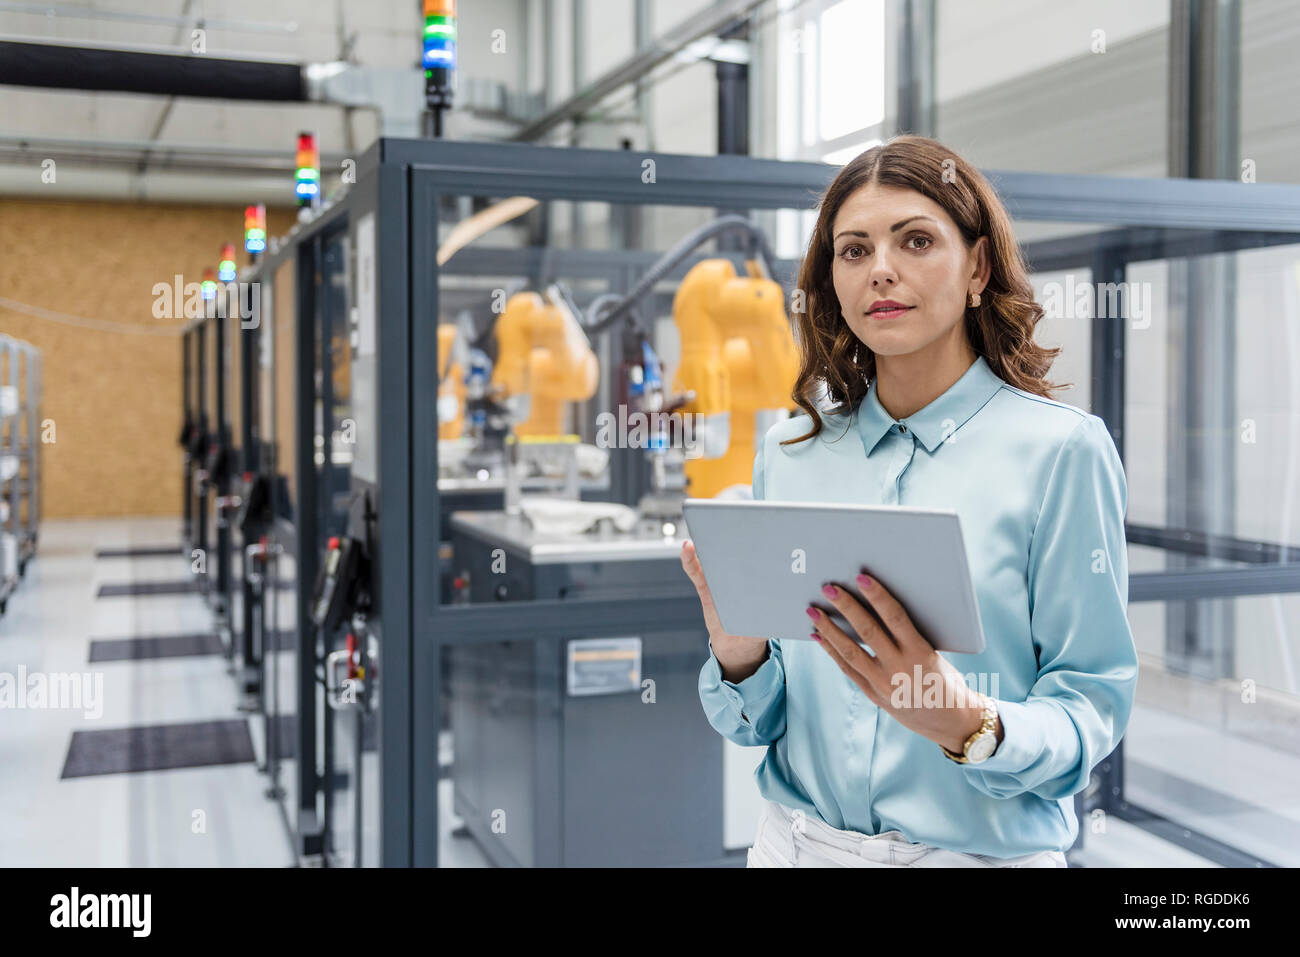 Businesswoman in high tech company controlling industrial robots, using digital tablet Stock Photo